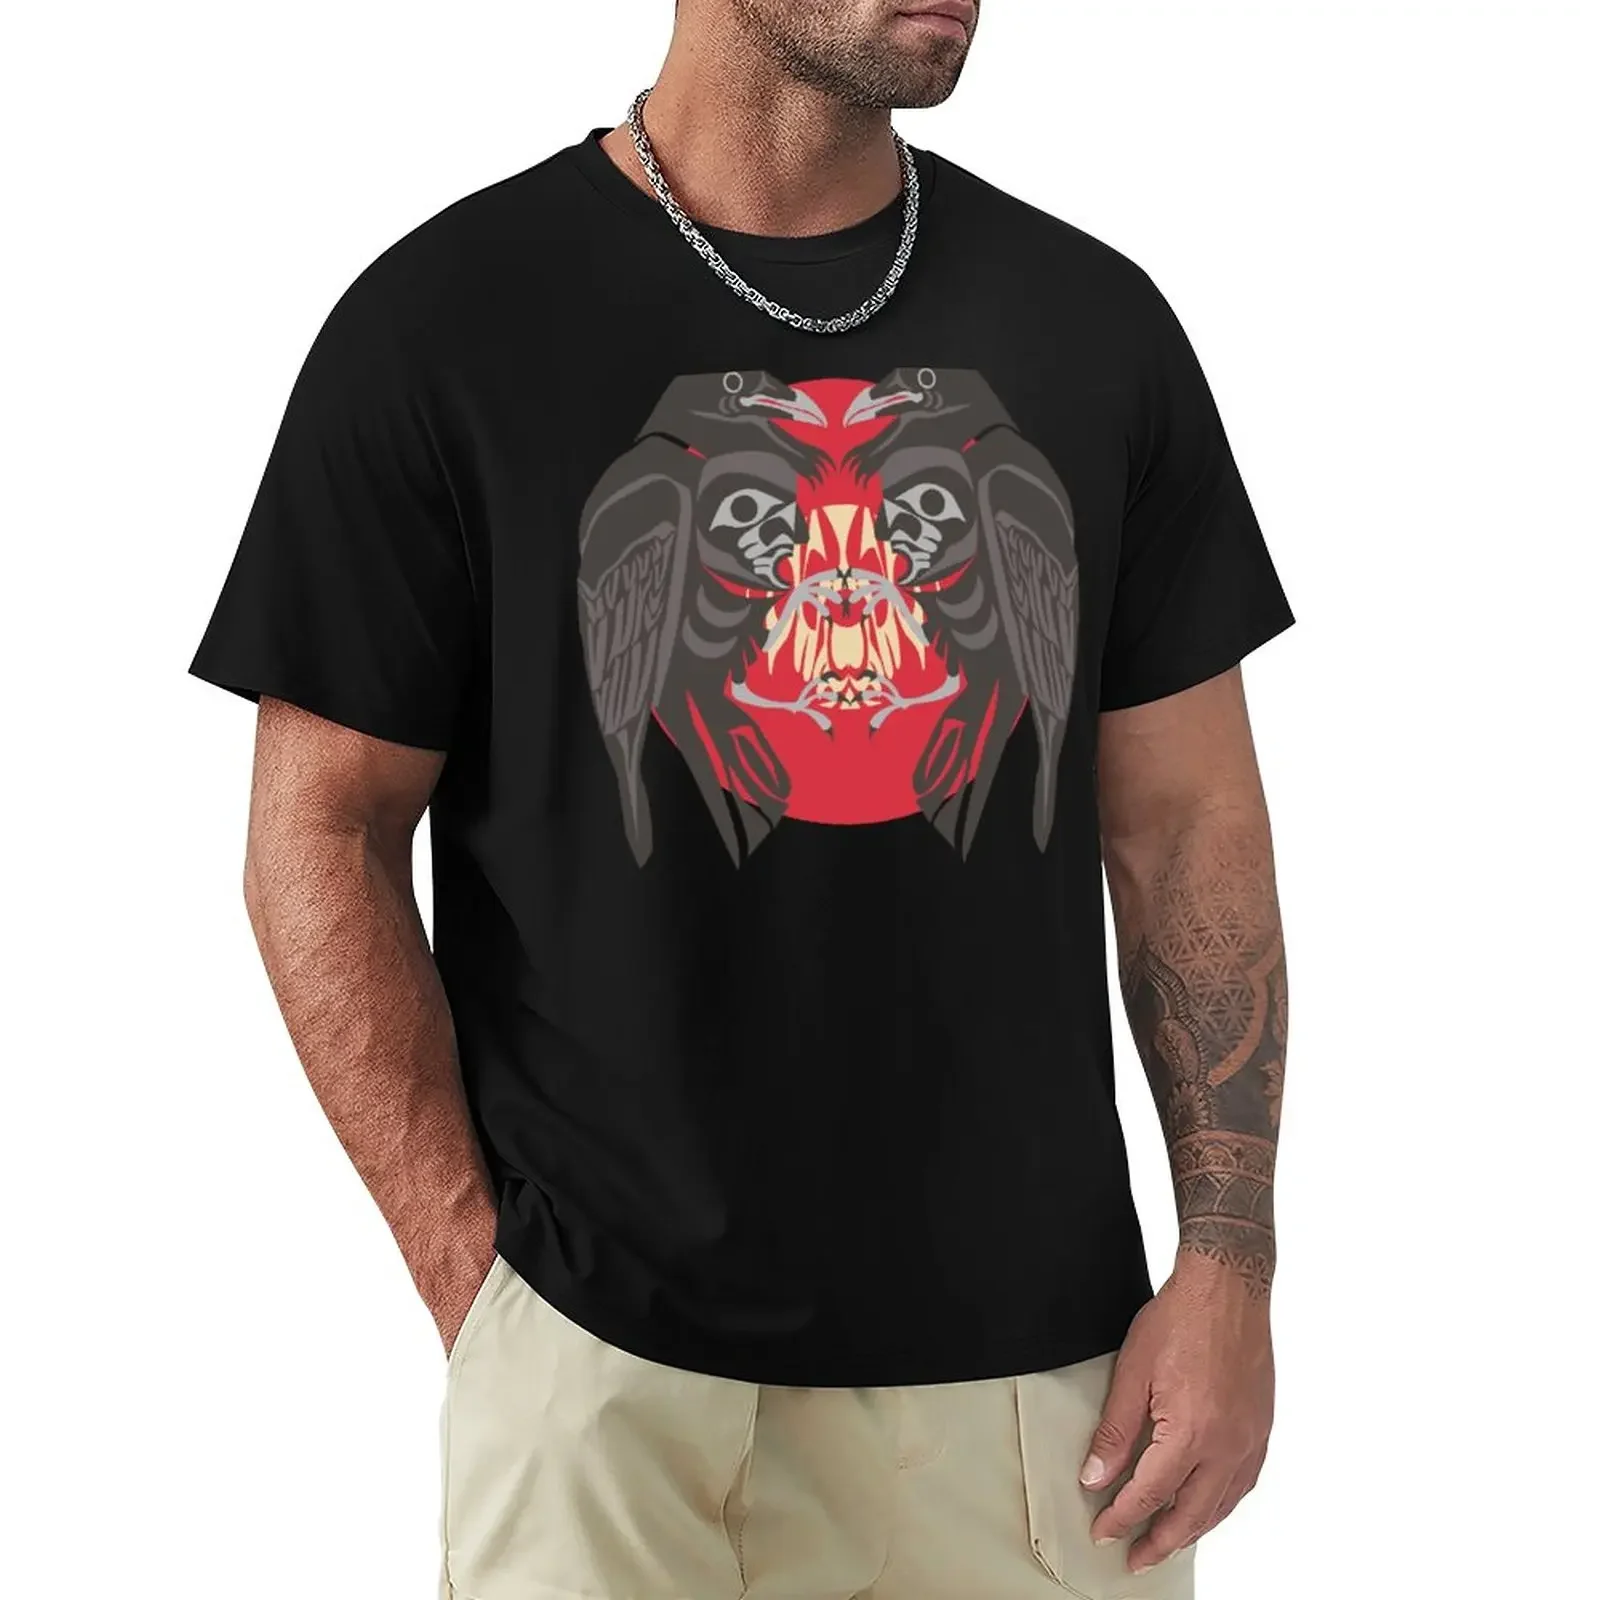 

Raven Vision T-Shirt Short sleeve tee plus sizes new edition customizeds men clothing